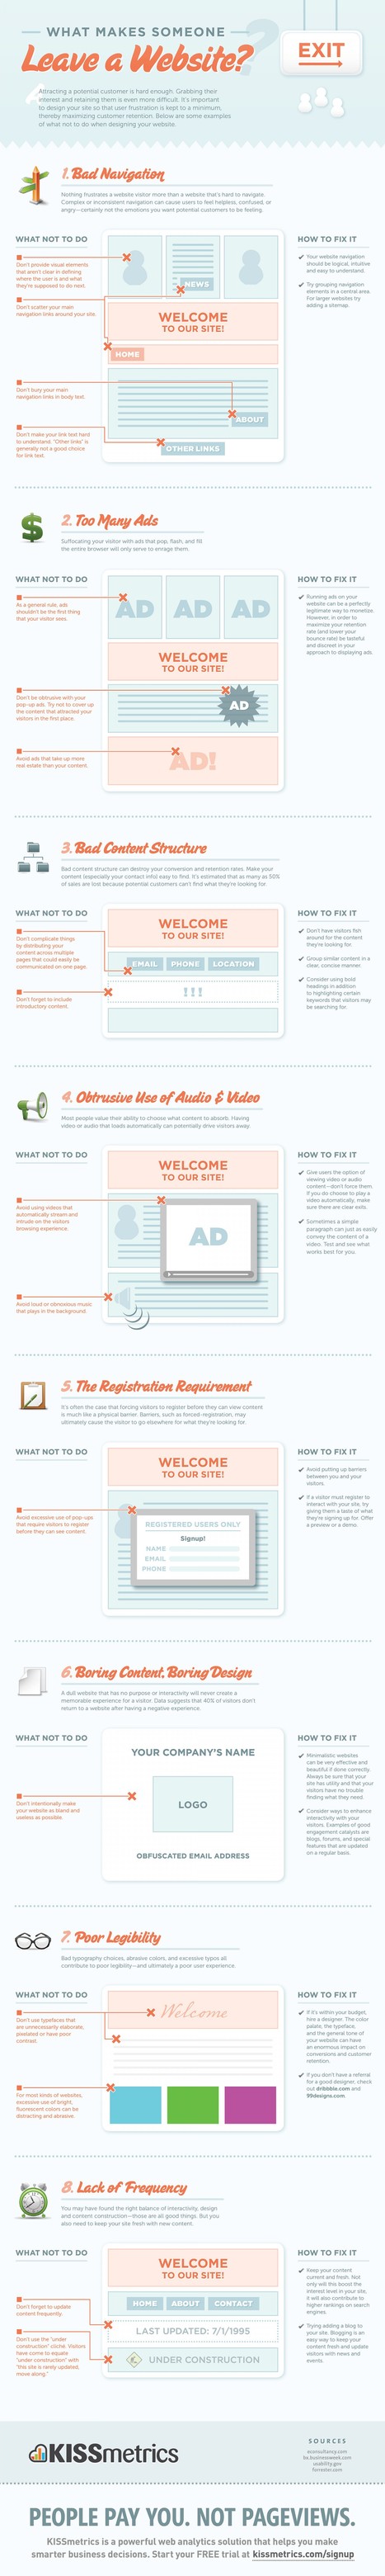 Avoid These 8 Deadly Sins of Site Design | Infographic | E-Learning-Inclusivo (Mashup) | Scoop.it